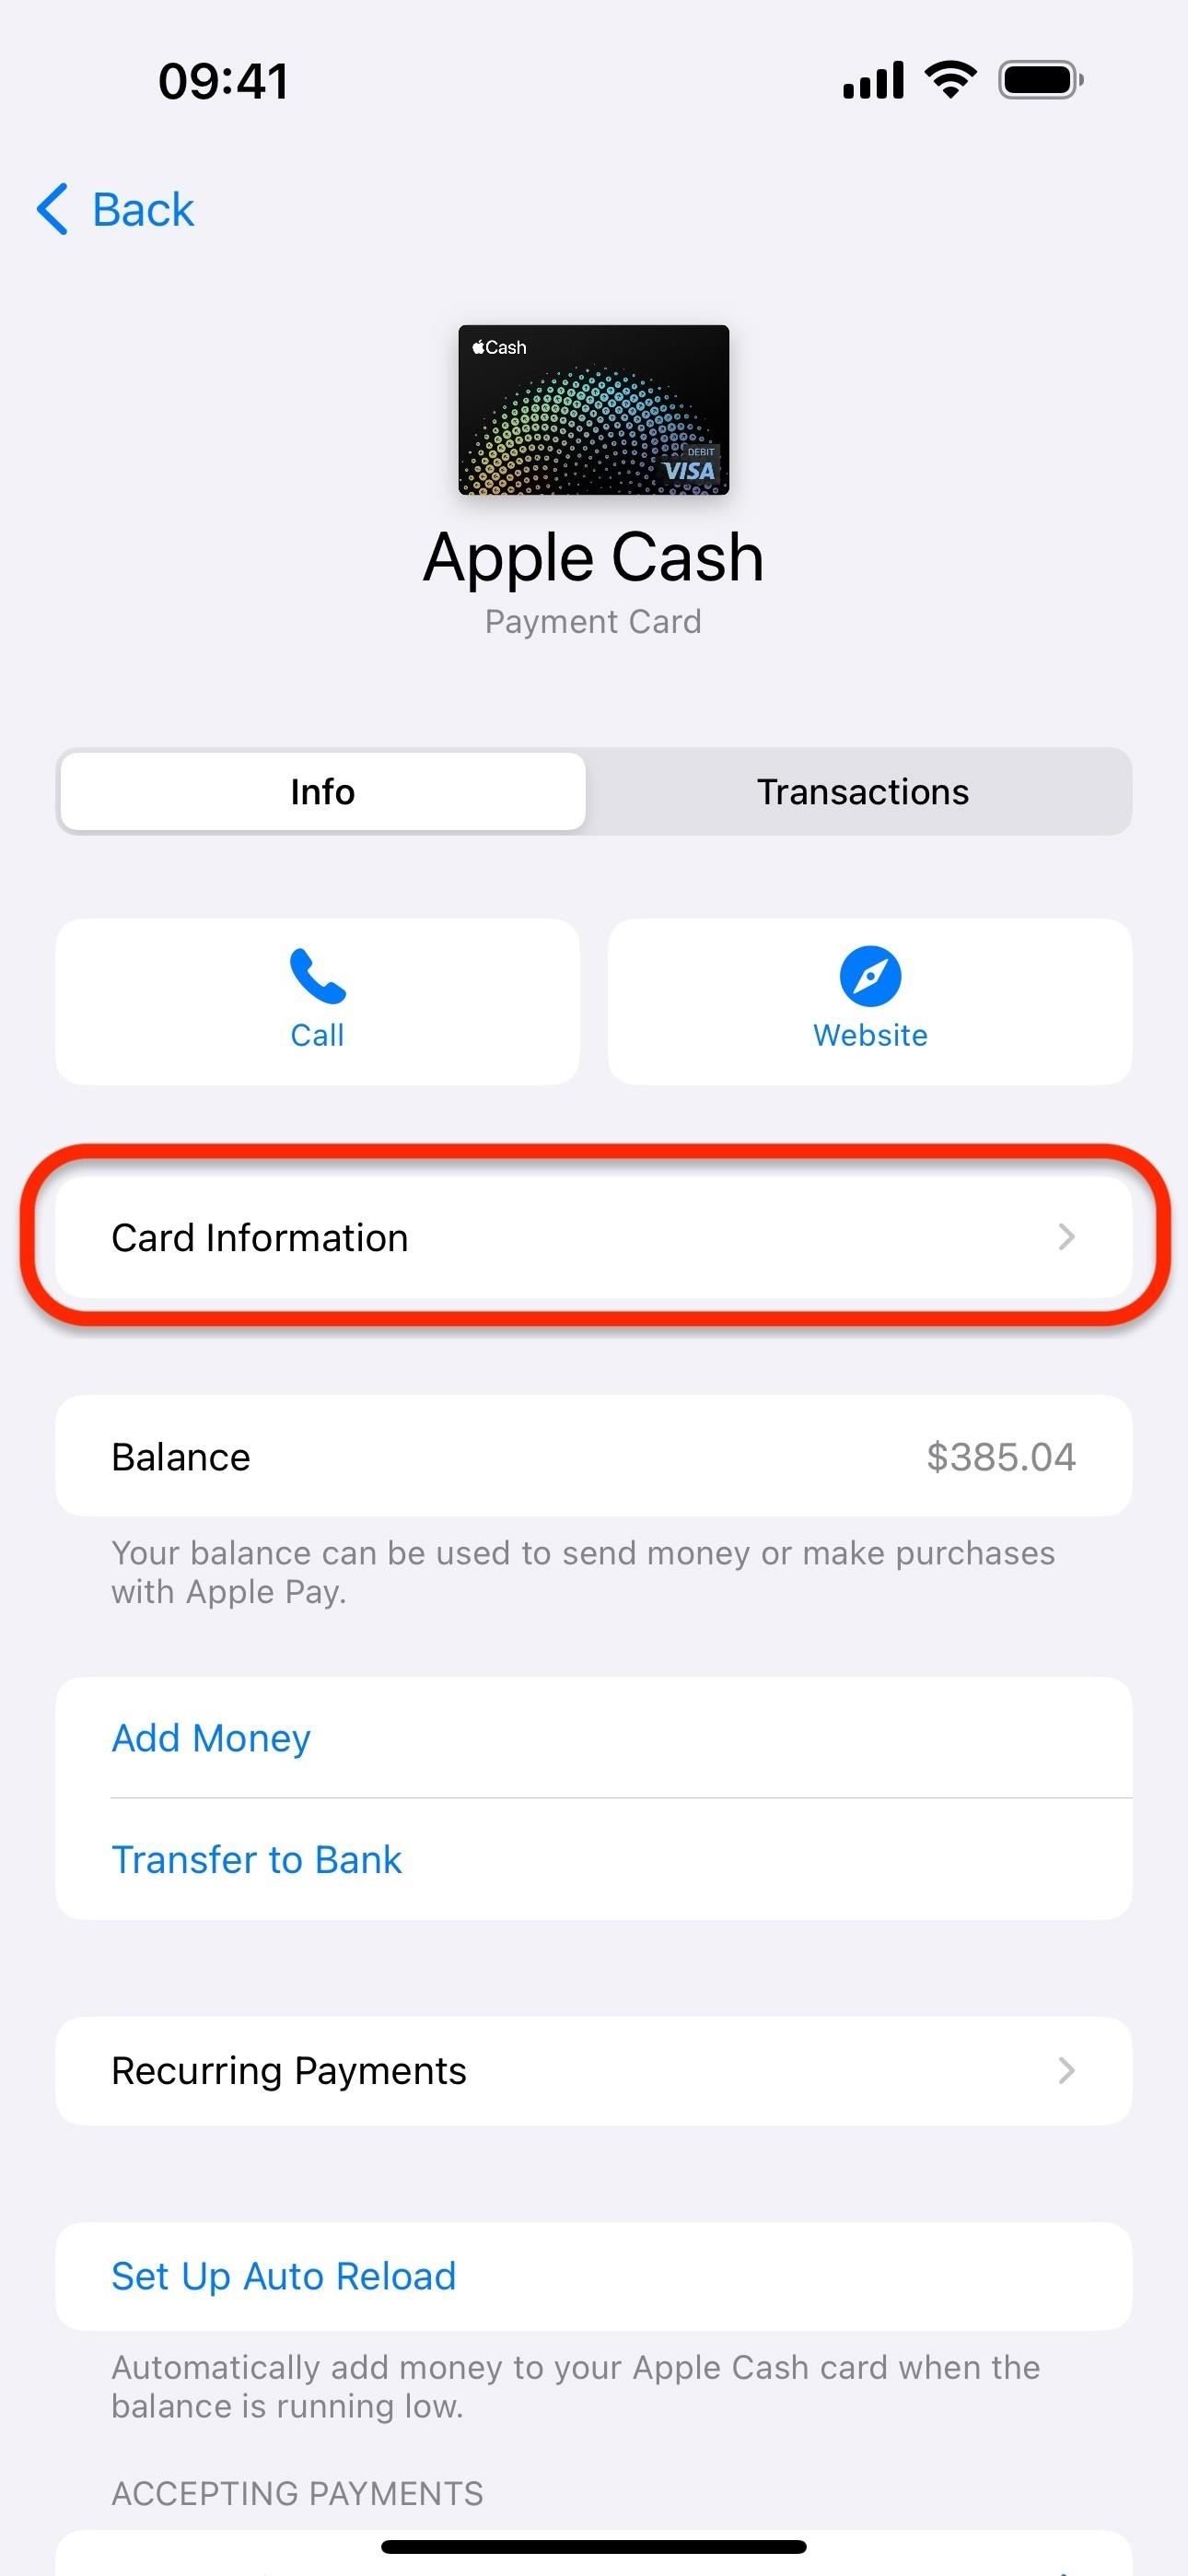 Set Up a Virtual Card Number for Apple Cash on Your iPhone to Use Where Apple Pay Isn't Accepted